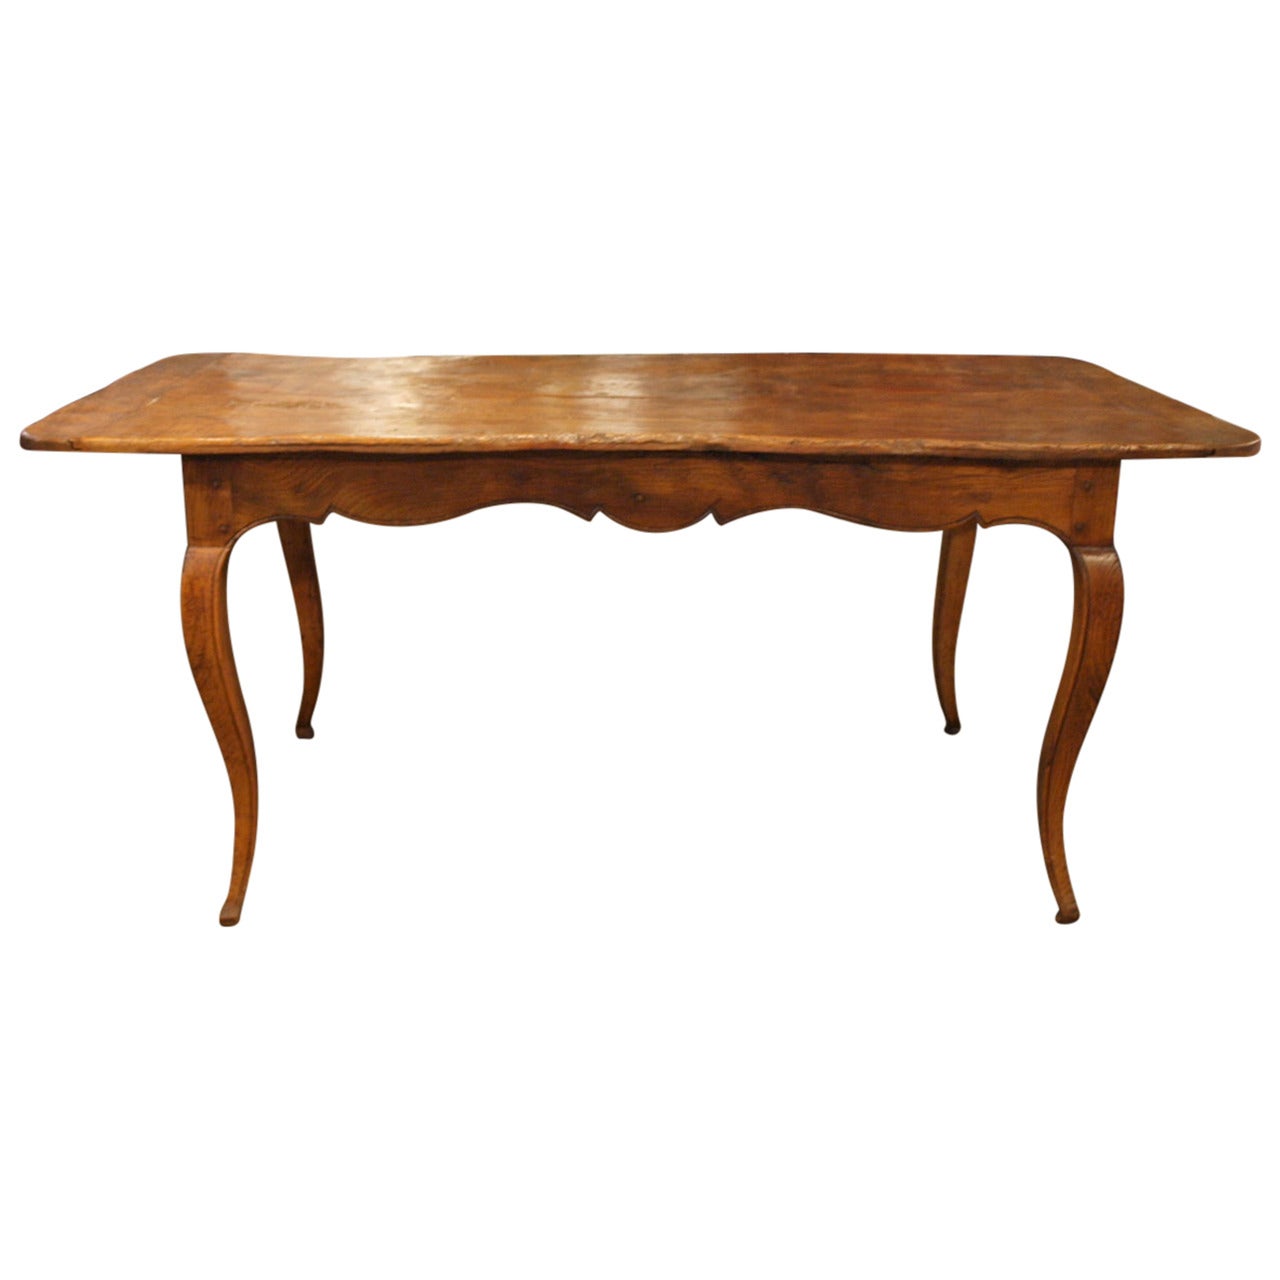 18th Century French Provencale Dining Table in Chestnut